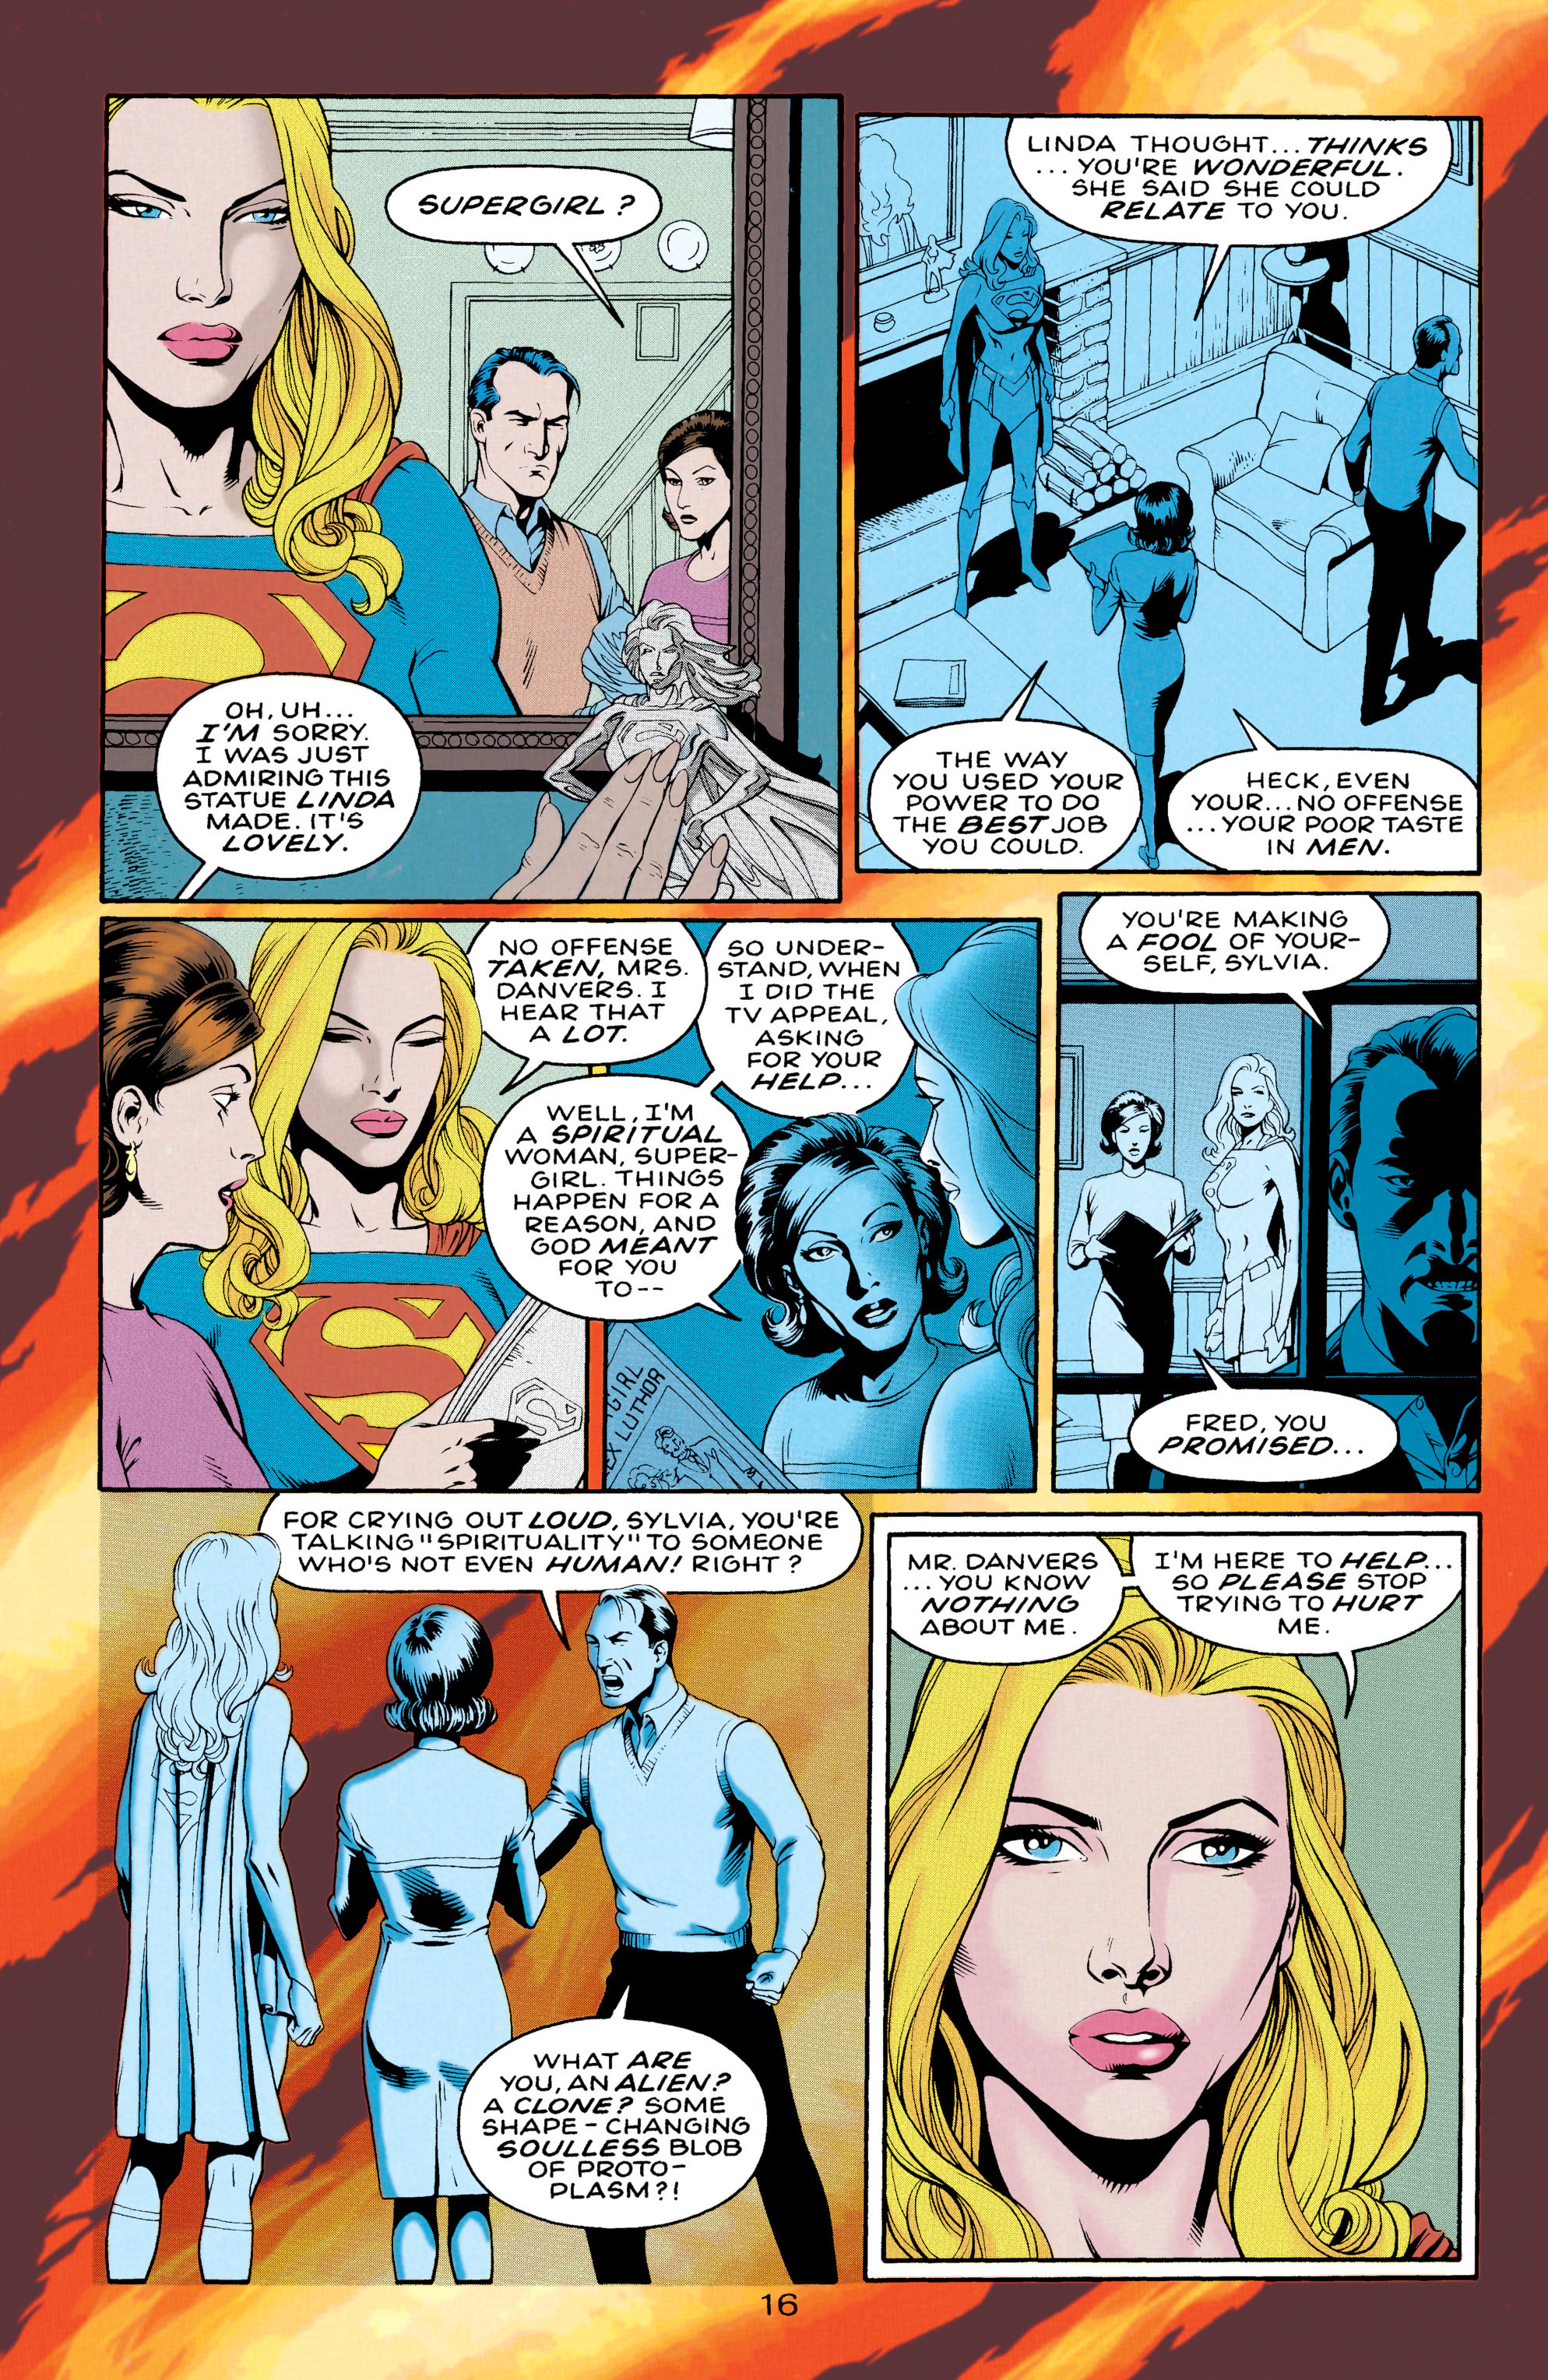 Supergirl (1996) 1 Page 16